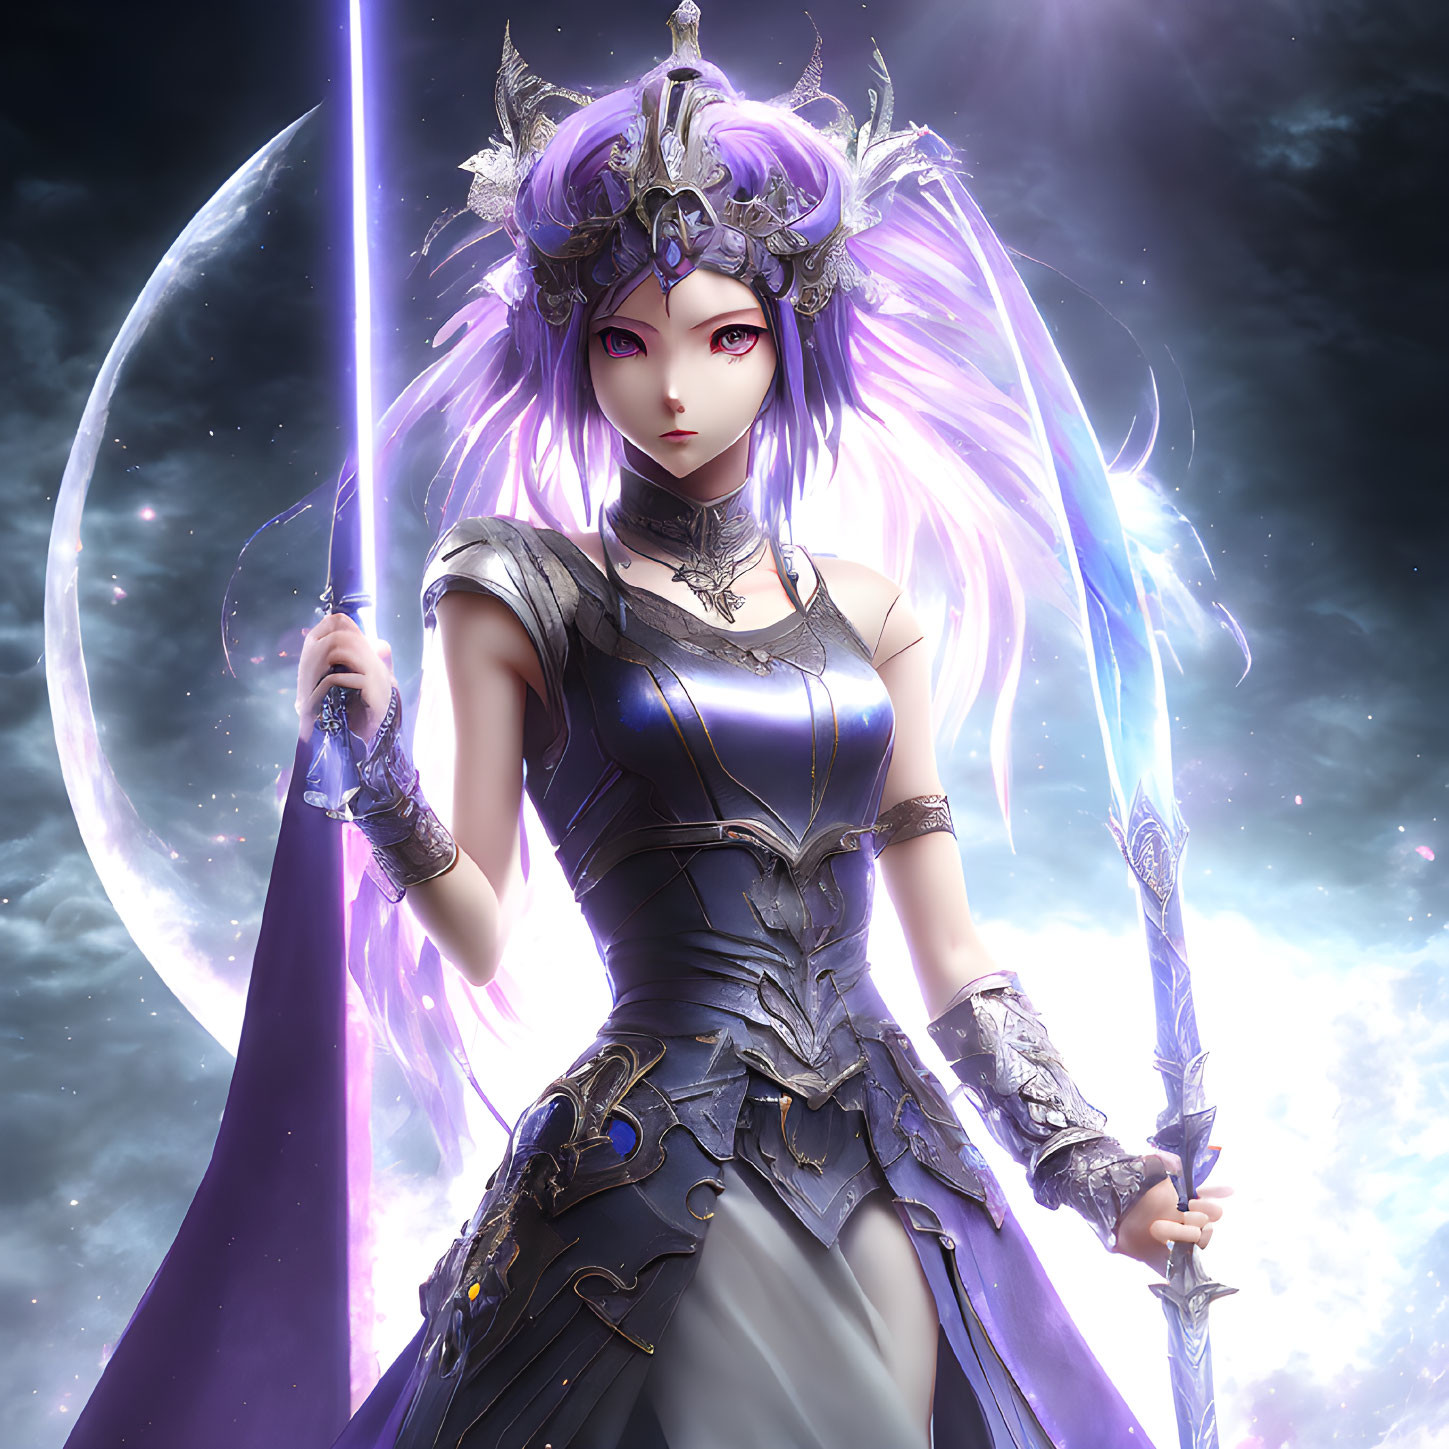 Animated female warrior with purple hair and glowing sword in intricate silver armor against cosmic backdrop